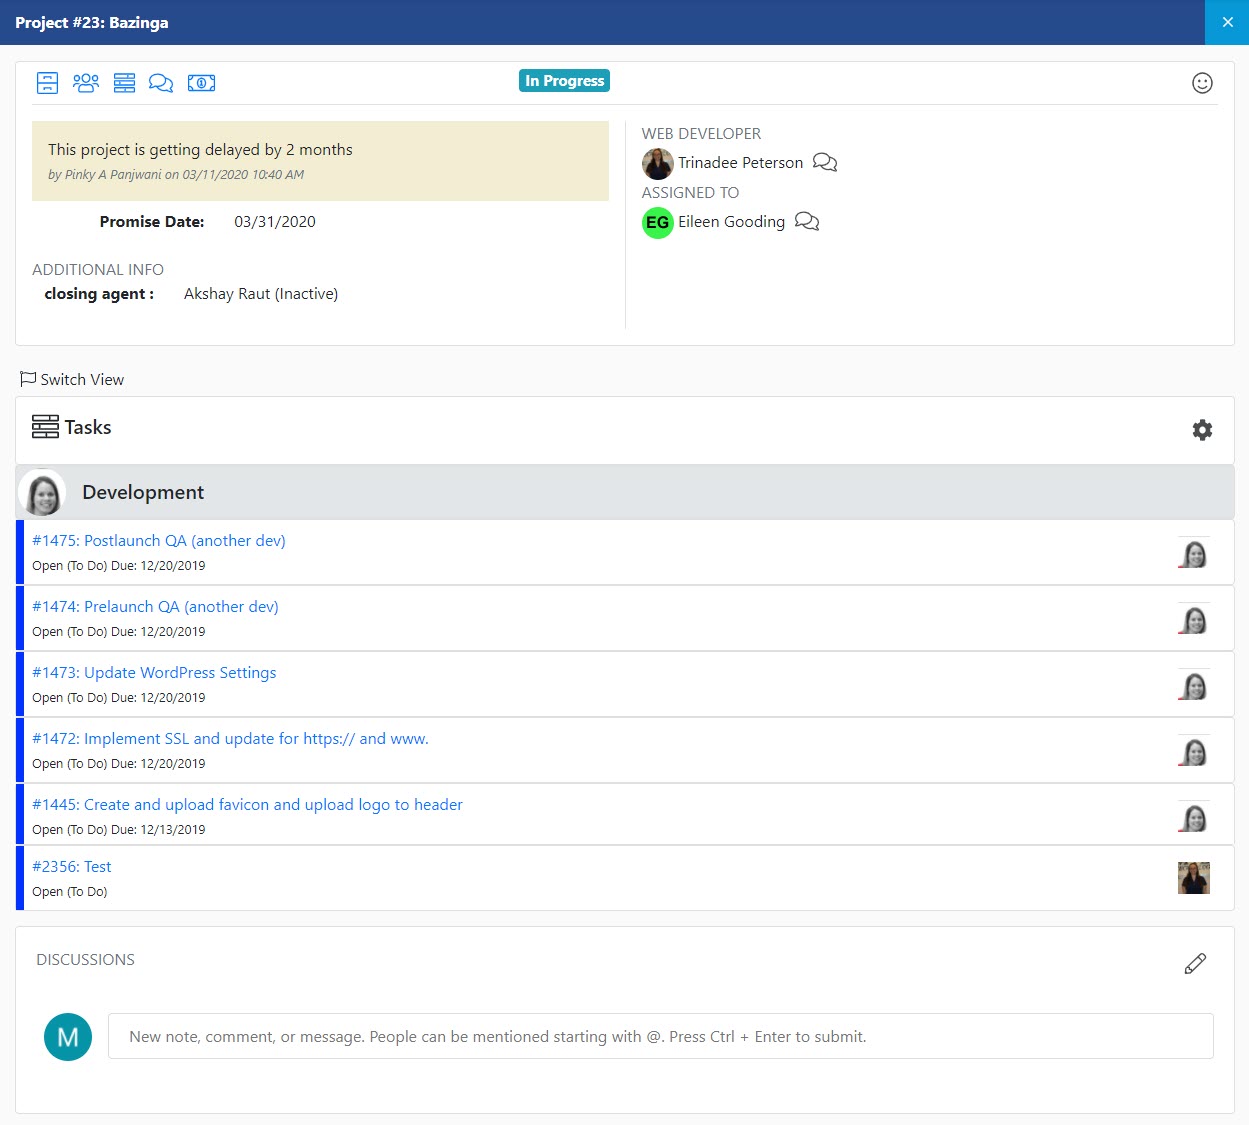 Customer portal project view including Status, web developer, assginee, promise date, tasks and discussions